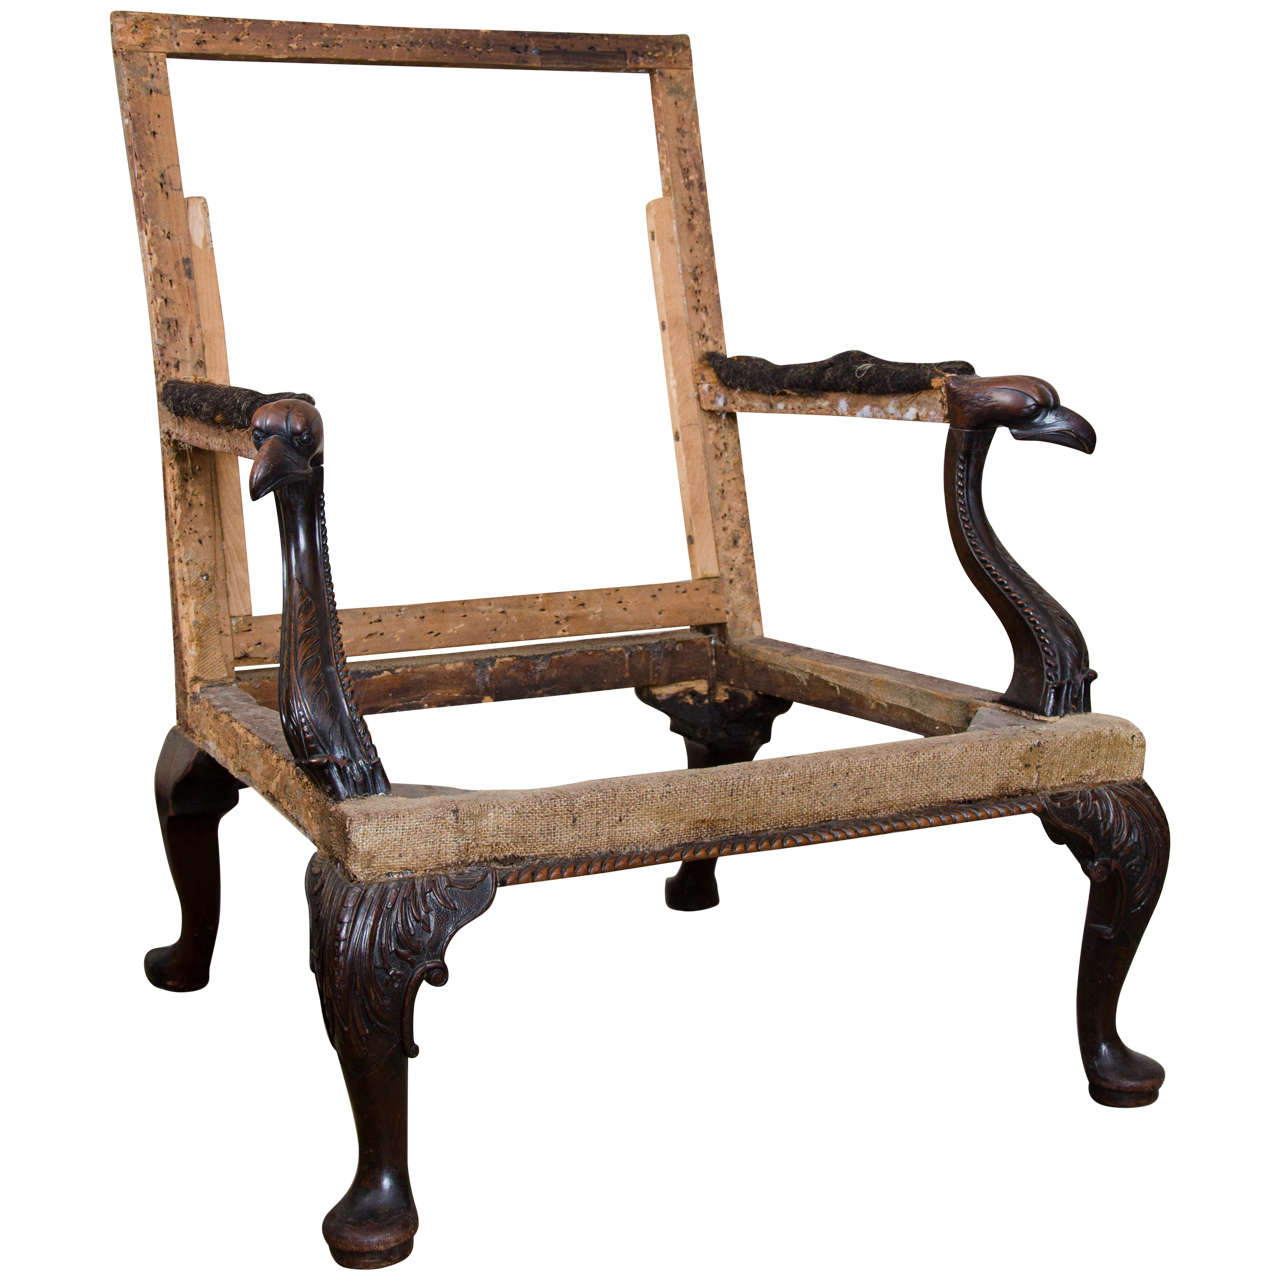 George II carved-walnut Gainsborough chair, 18th century or earlier, offered by Jamb